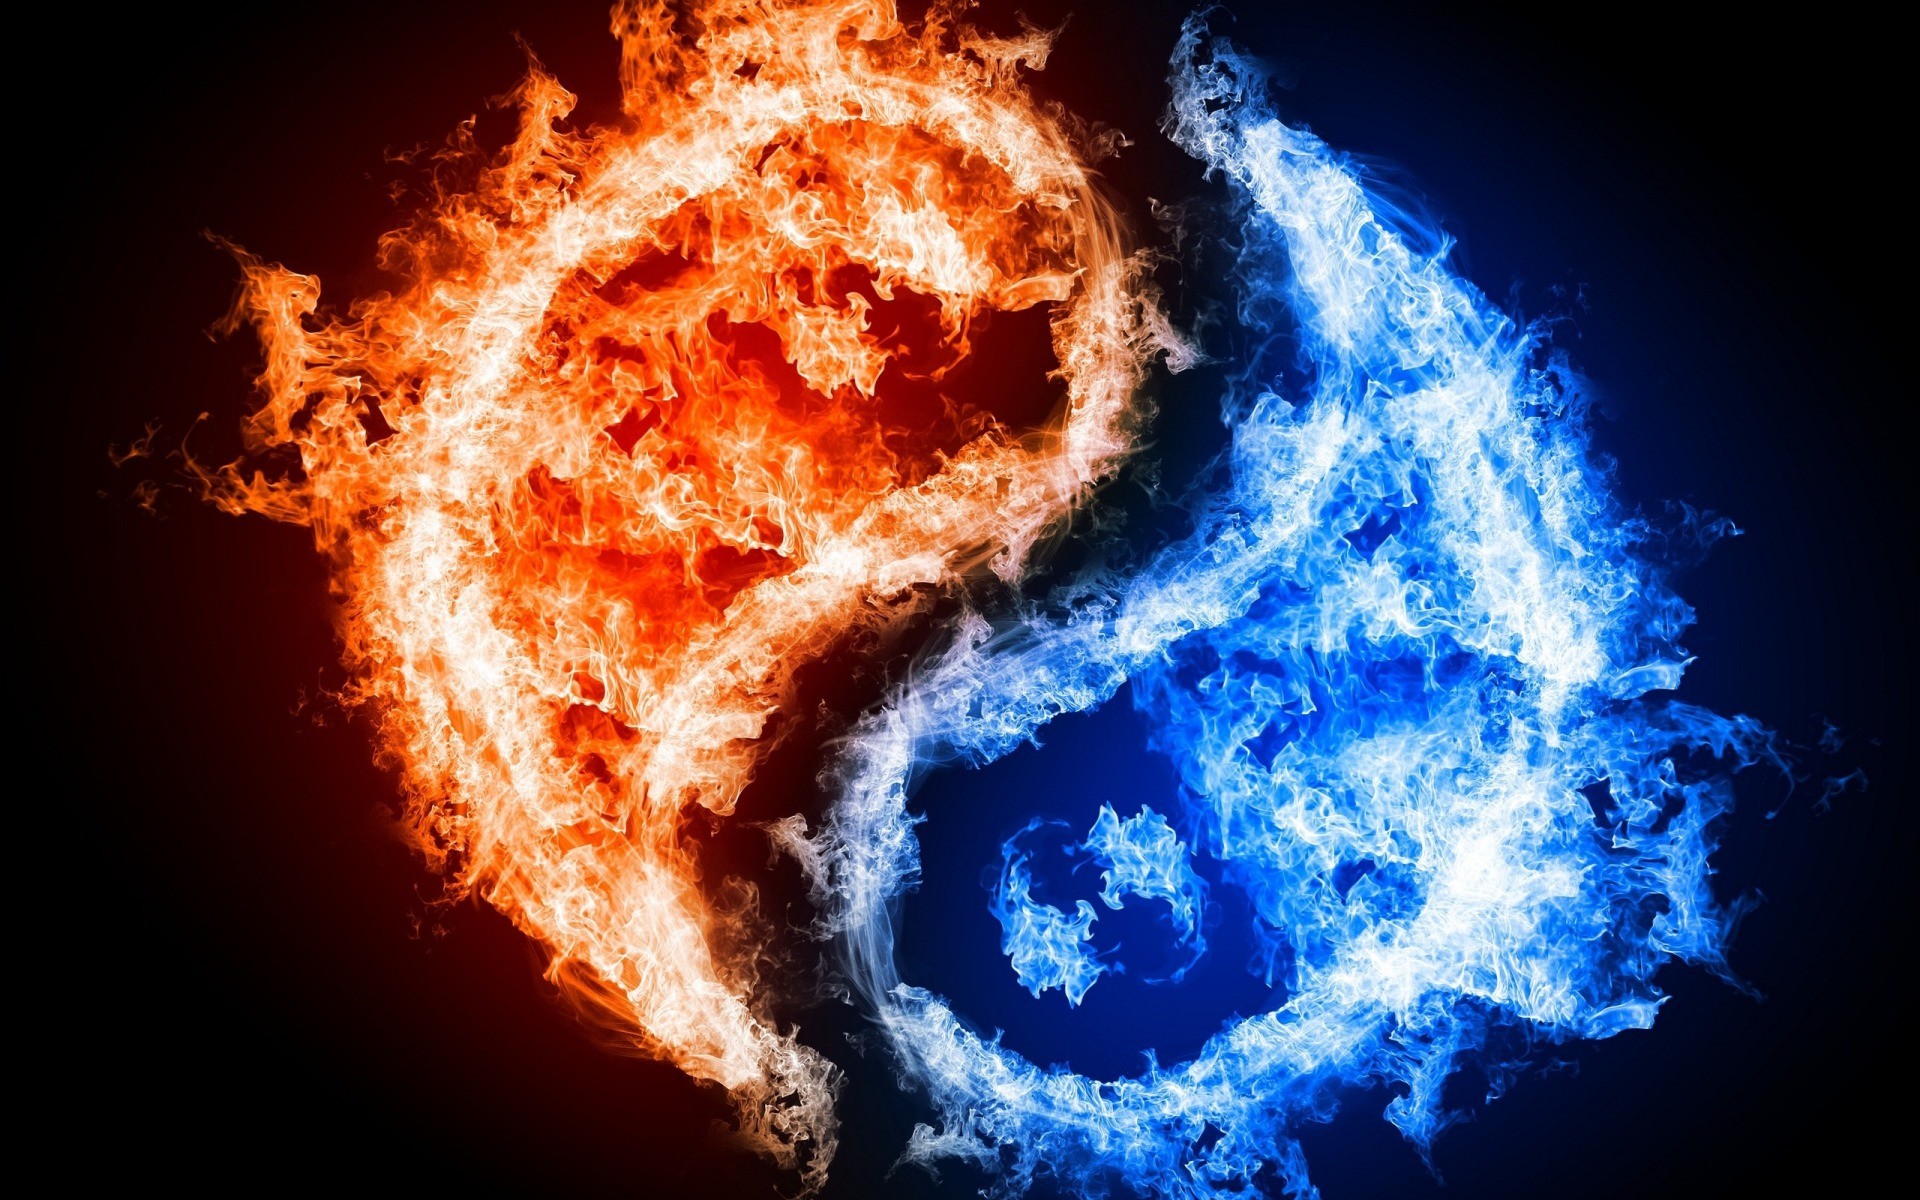 Blue and Red Fire Wallpaper, wallpaper, Blue and Red Fire Wallpaper hd